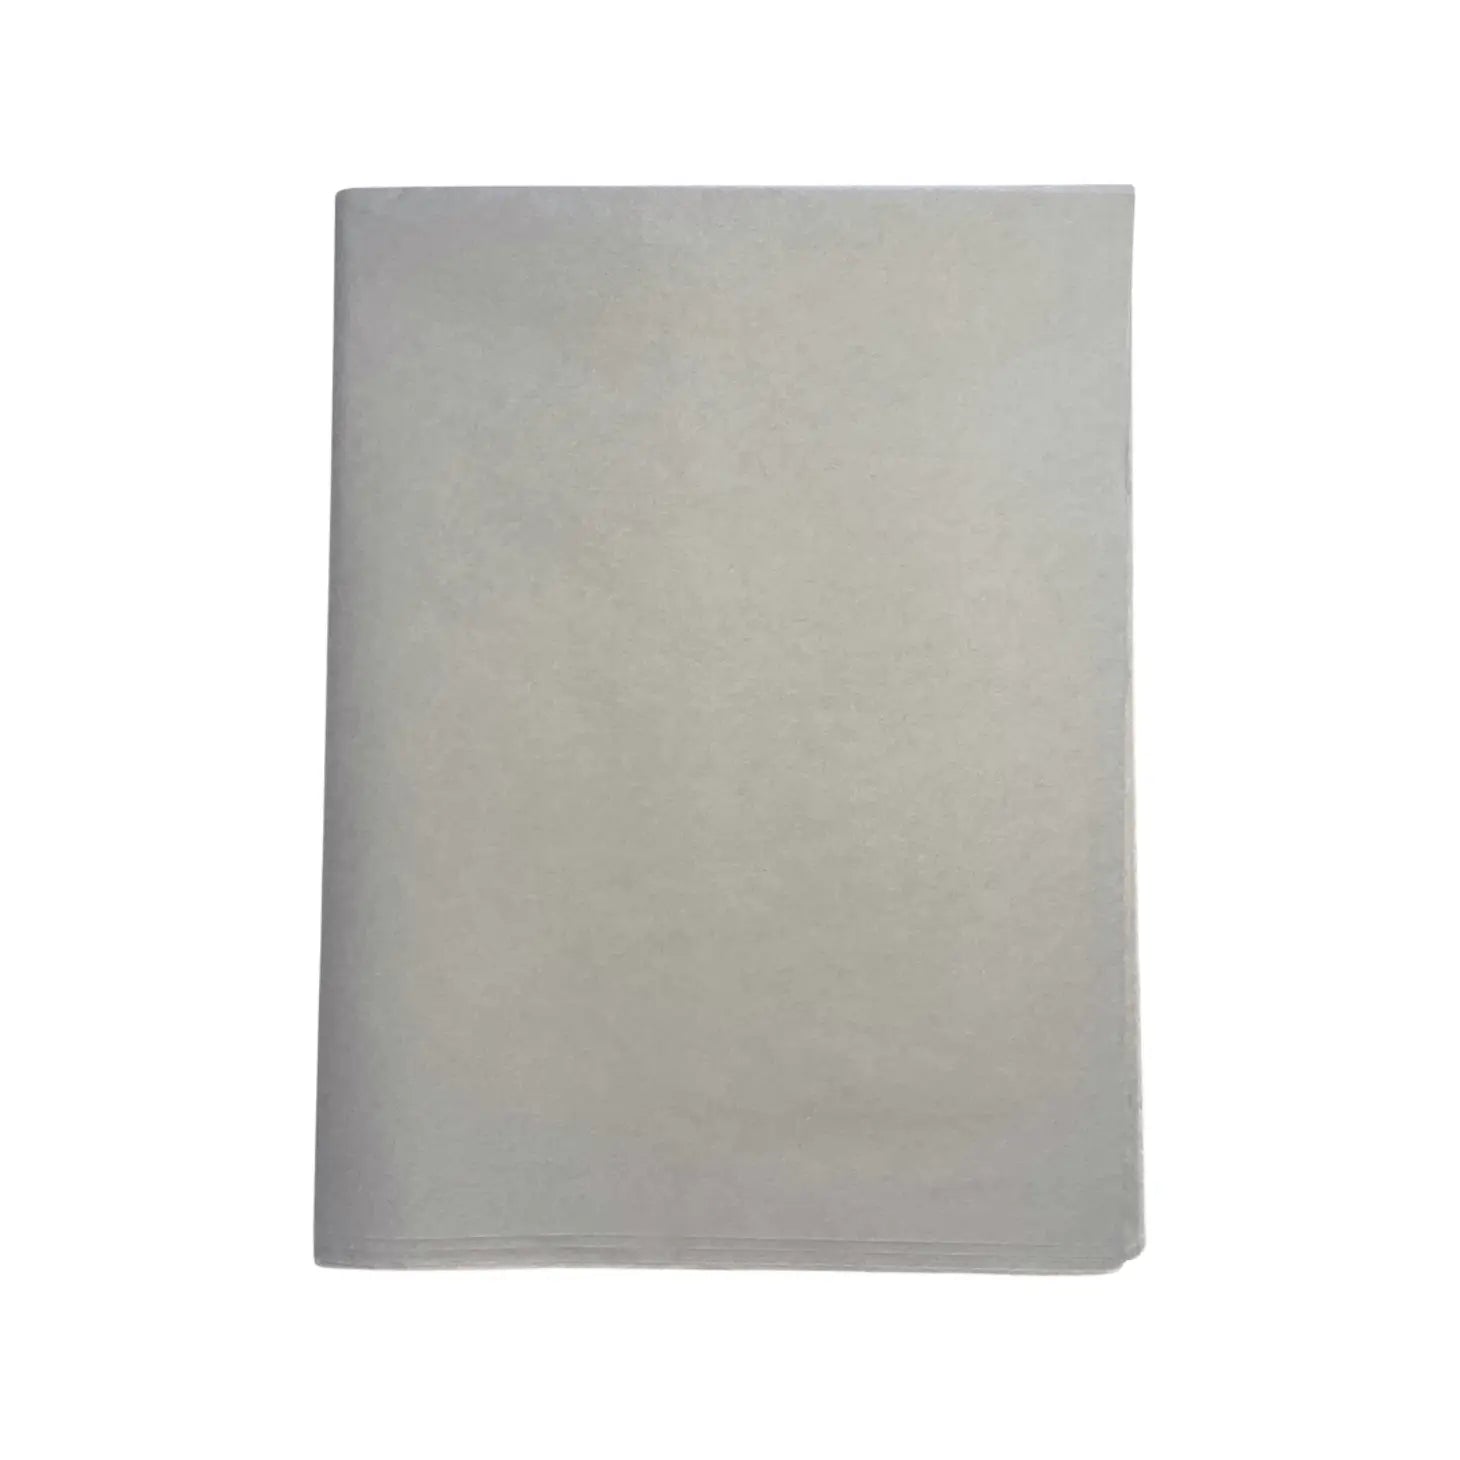 Packaged Tissue Paper